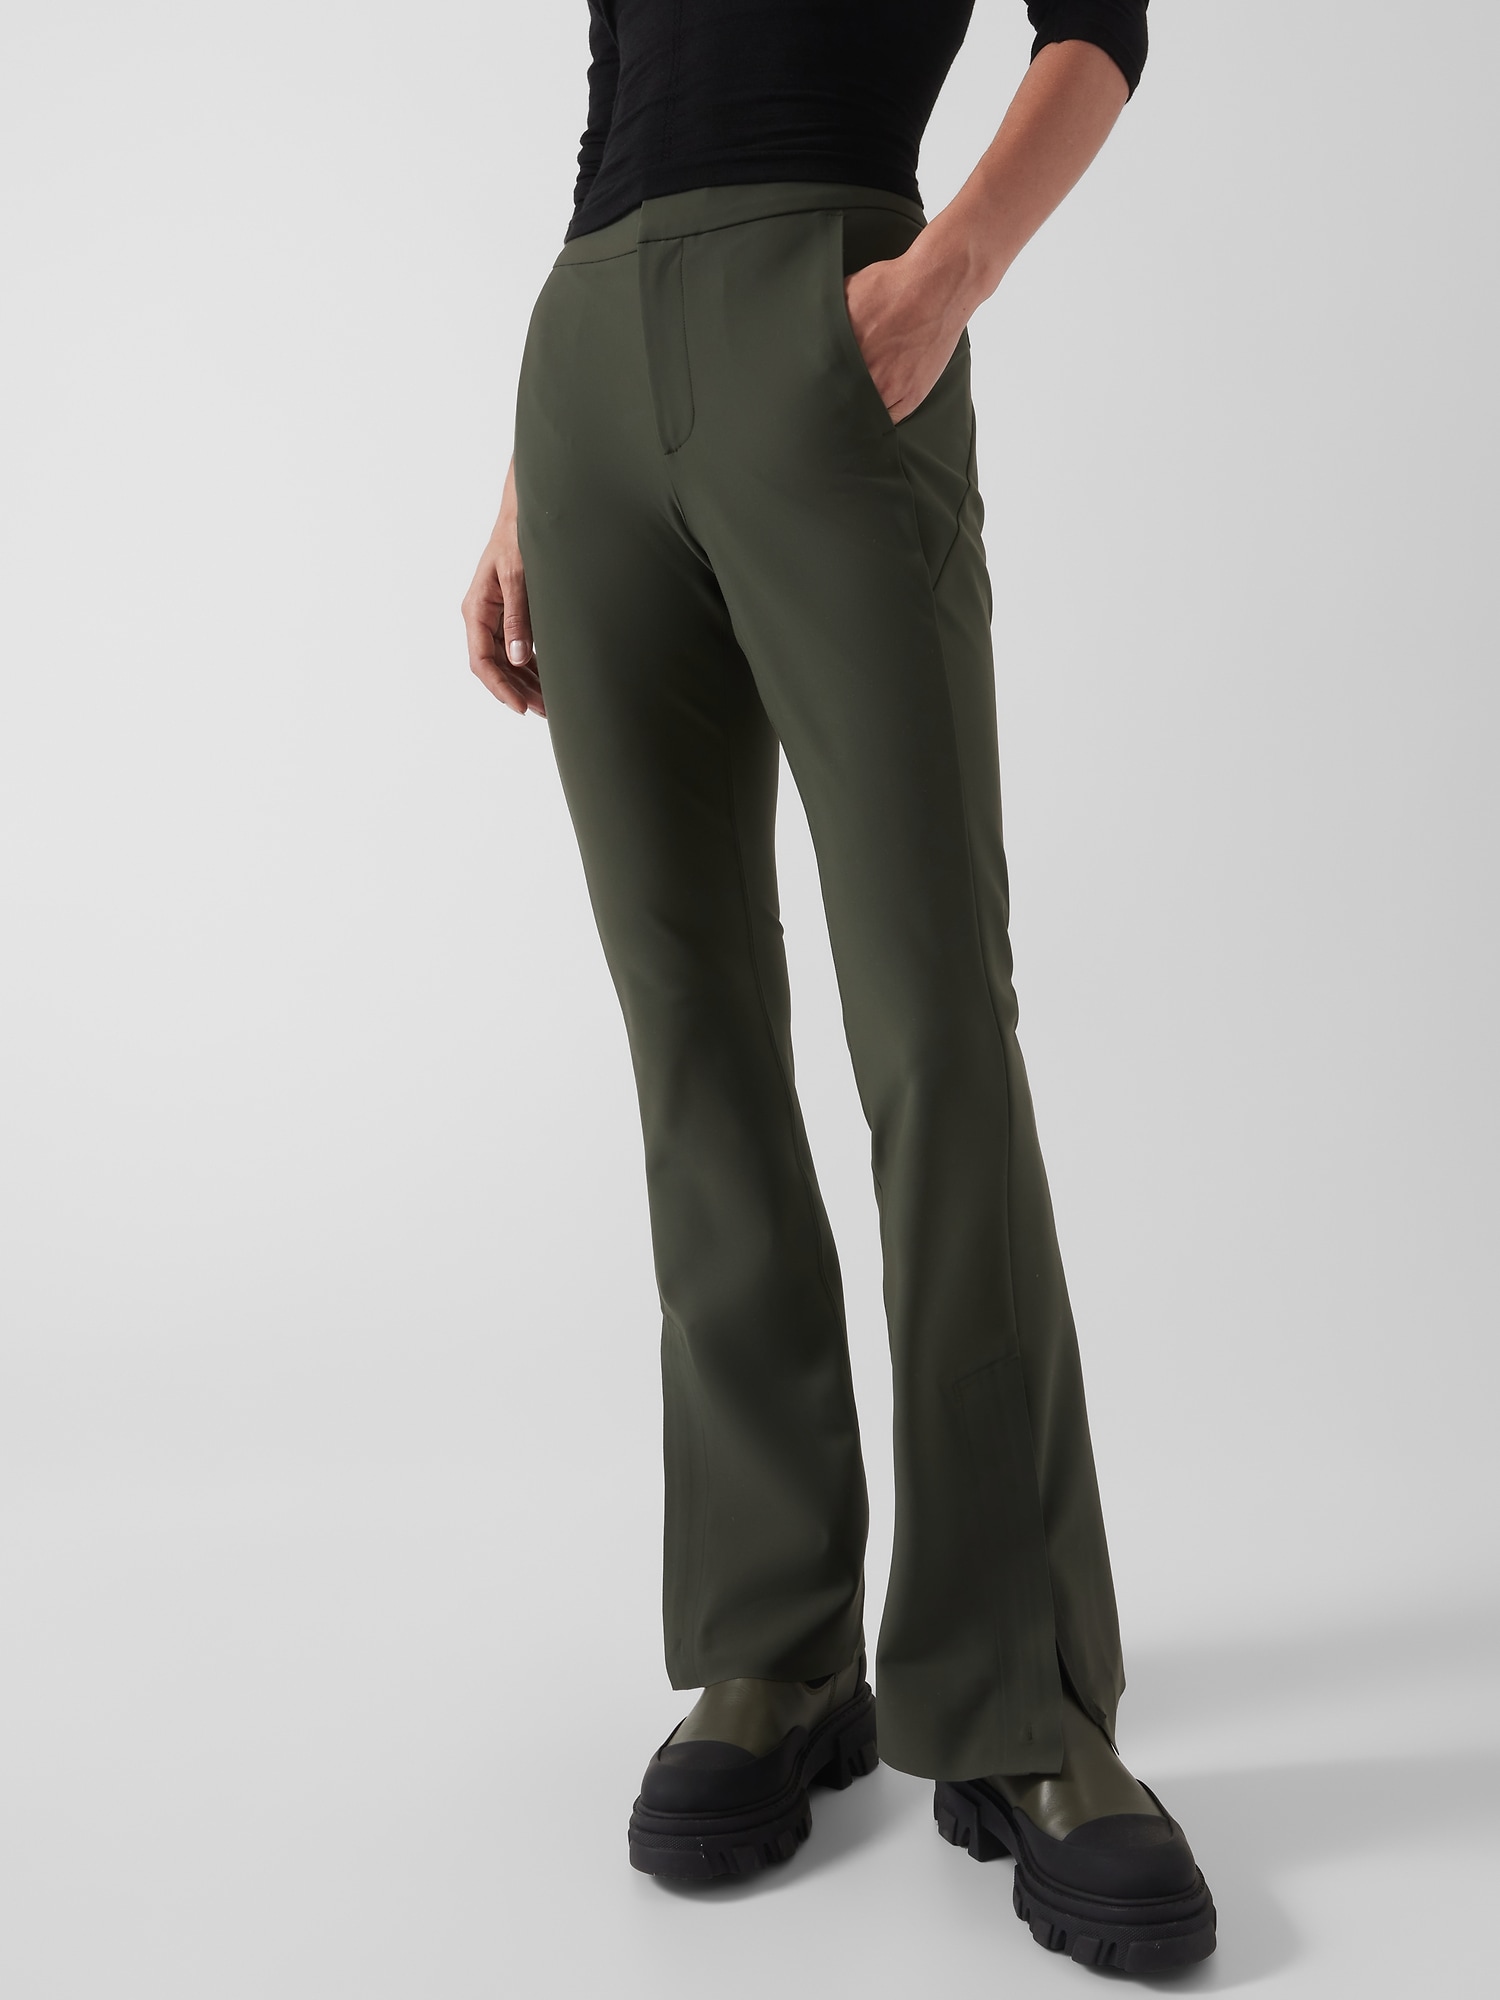 Athleta Elation Flare Pant Size XS - $26 (73% Off Retail) - From